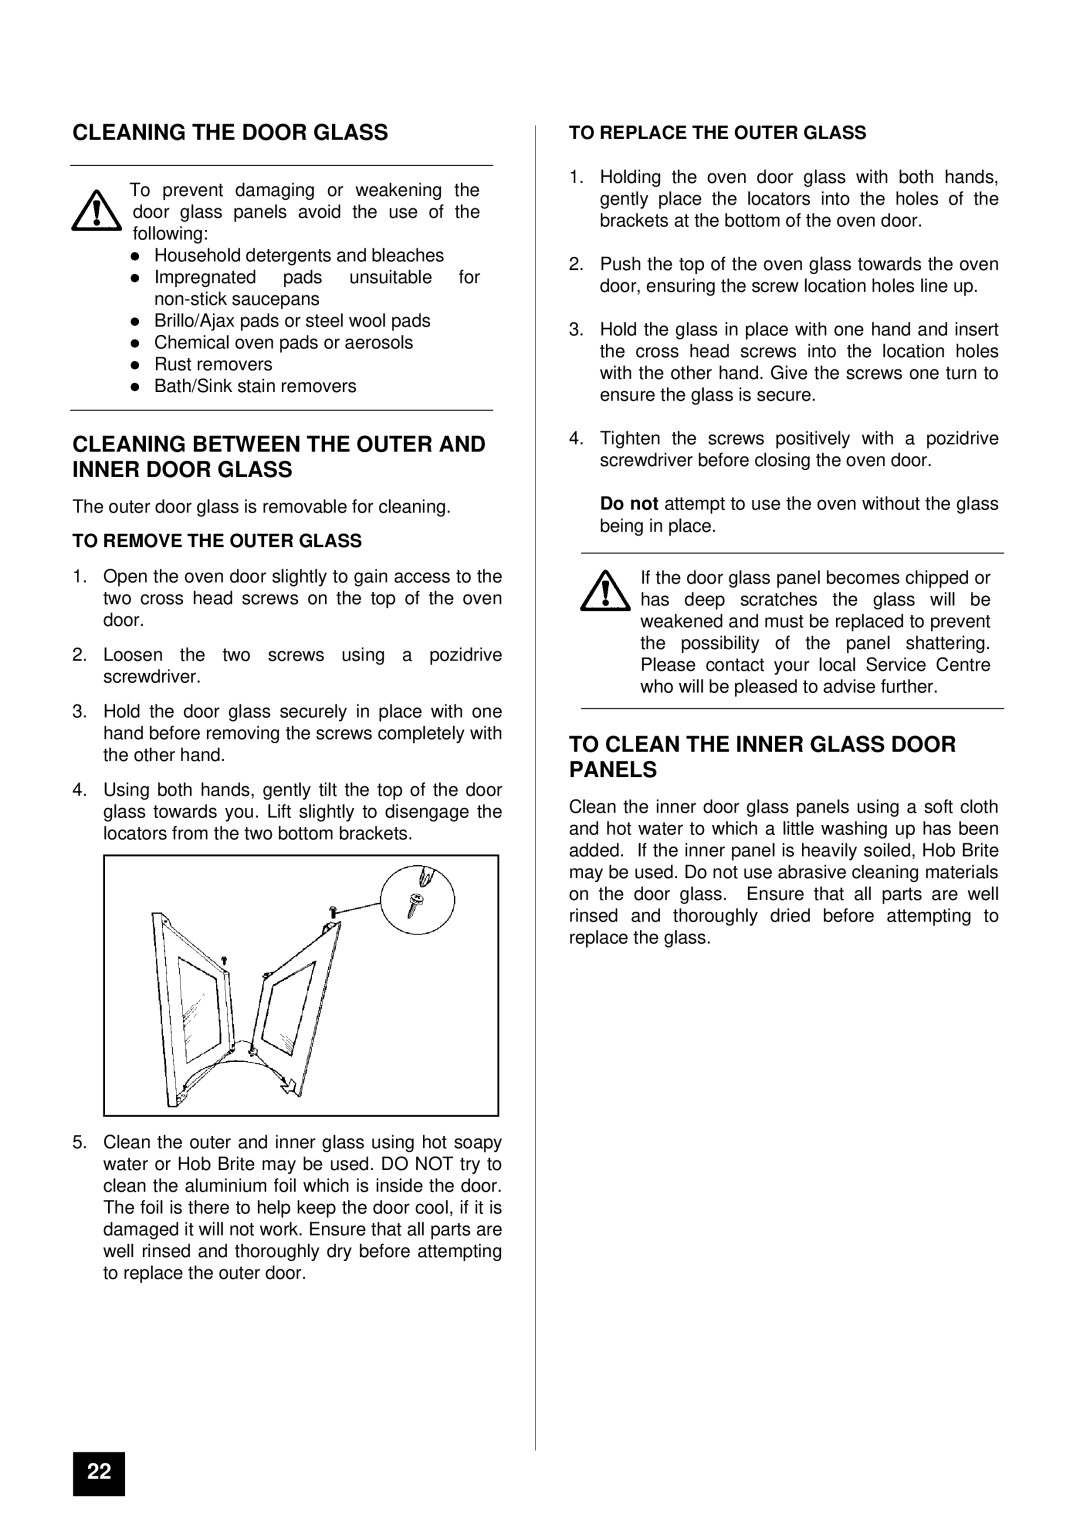 Tricity Bendix SI 251 installation instructions Cleaning the Door Glass, Cleaning Between the Outer and Inner Door Glass 